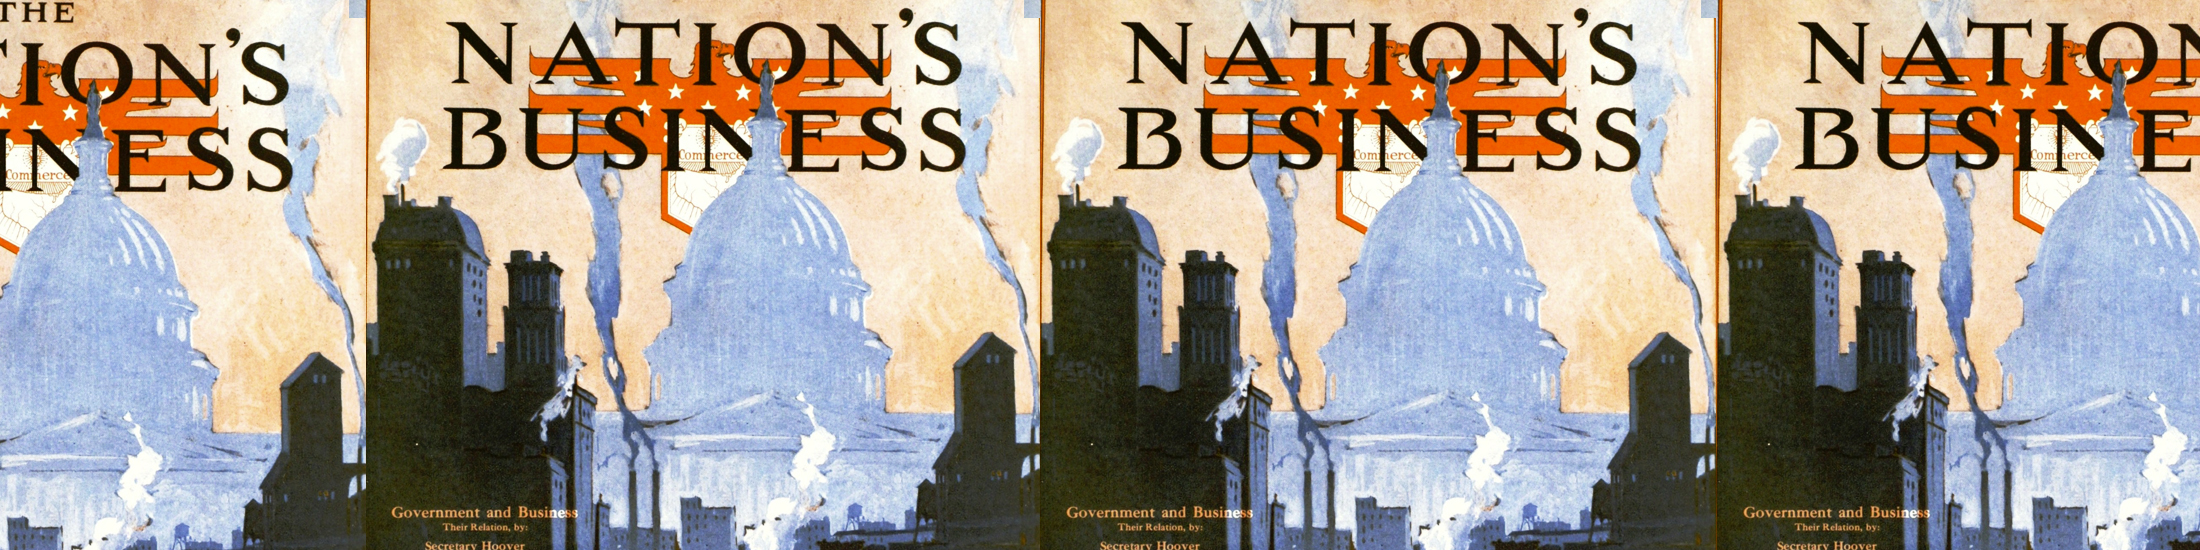 Nations business with a factory and the government capital building